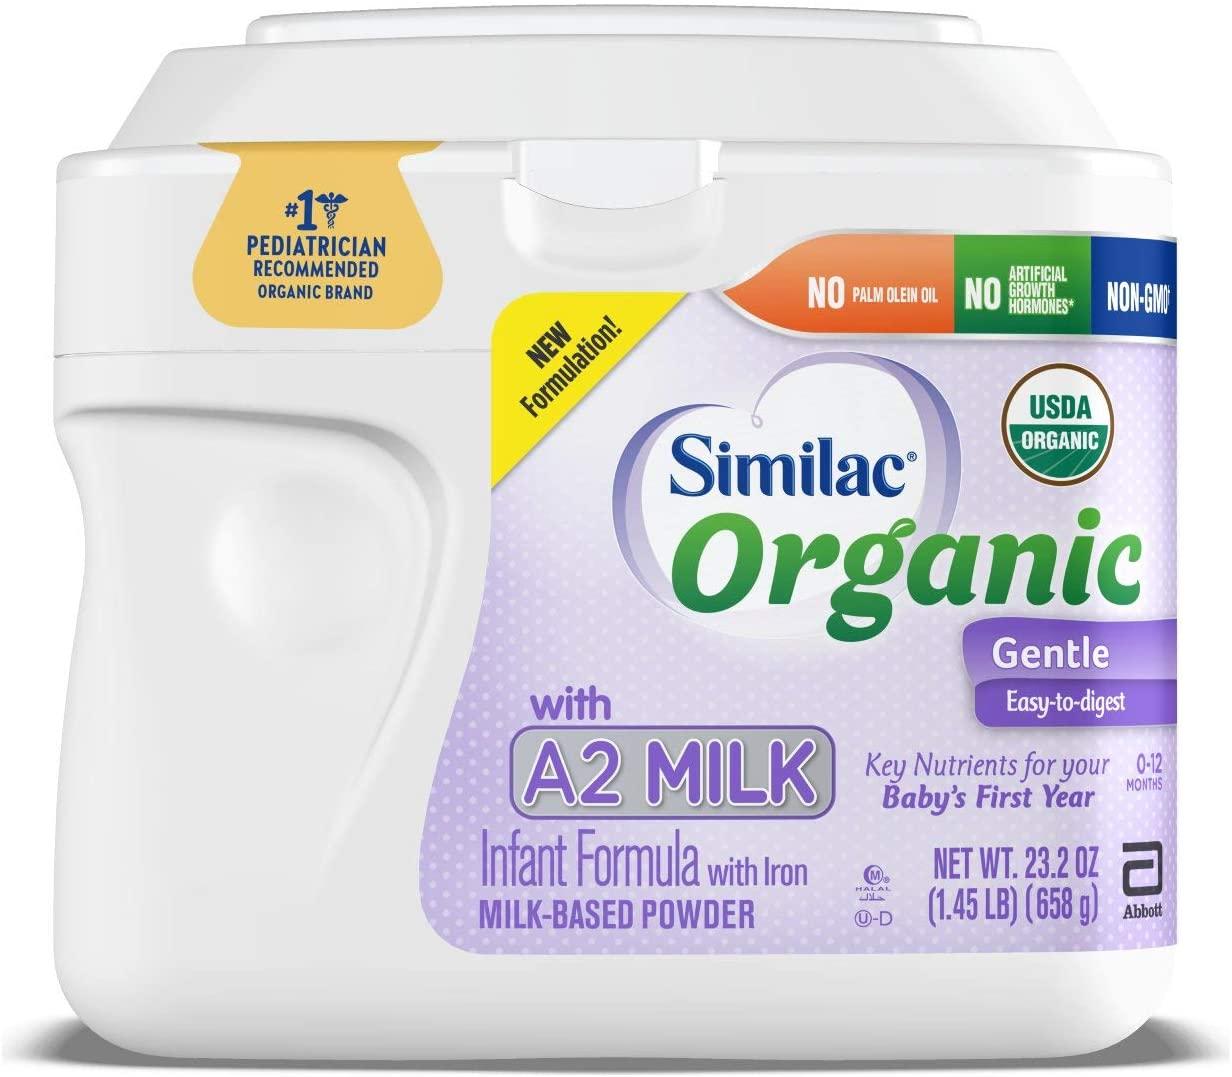 6 Pack of Similac Organic with A2 Milk Infant Formula for $74.06 Shipped